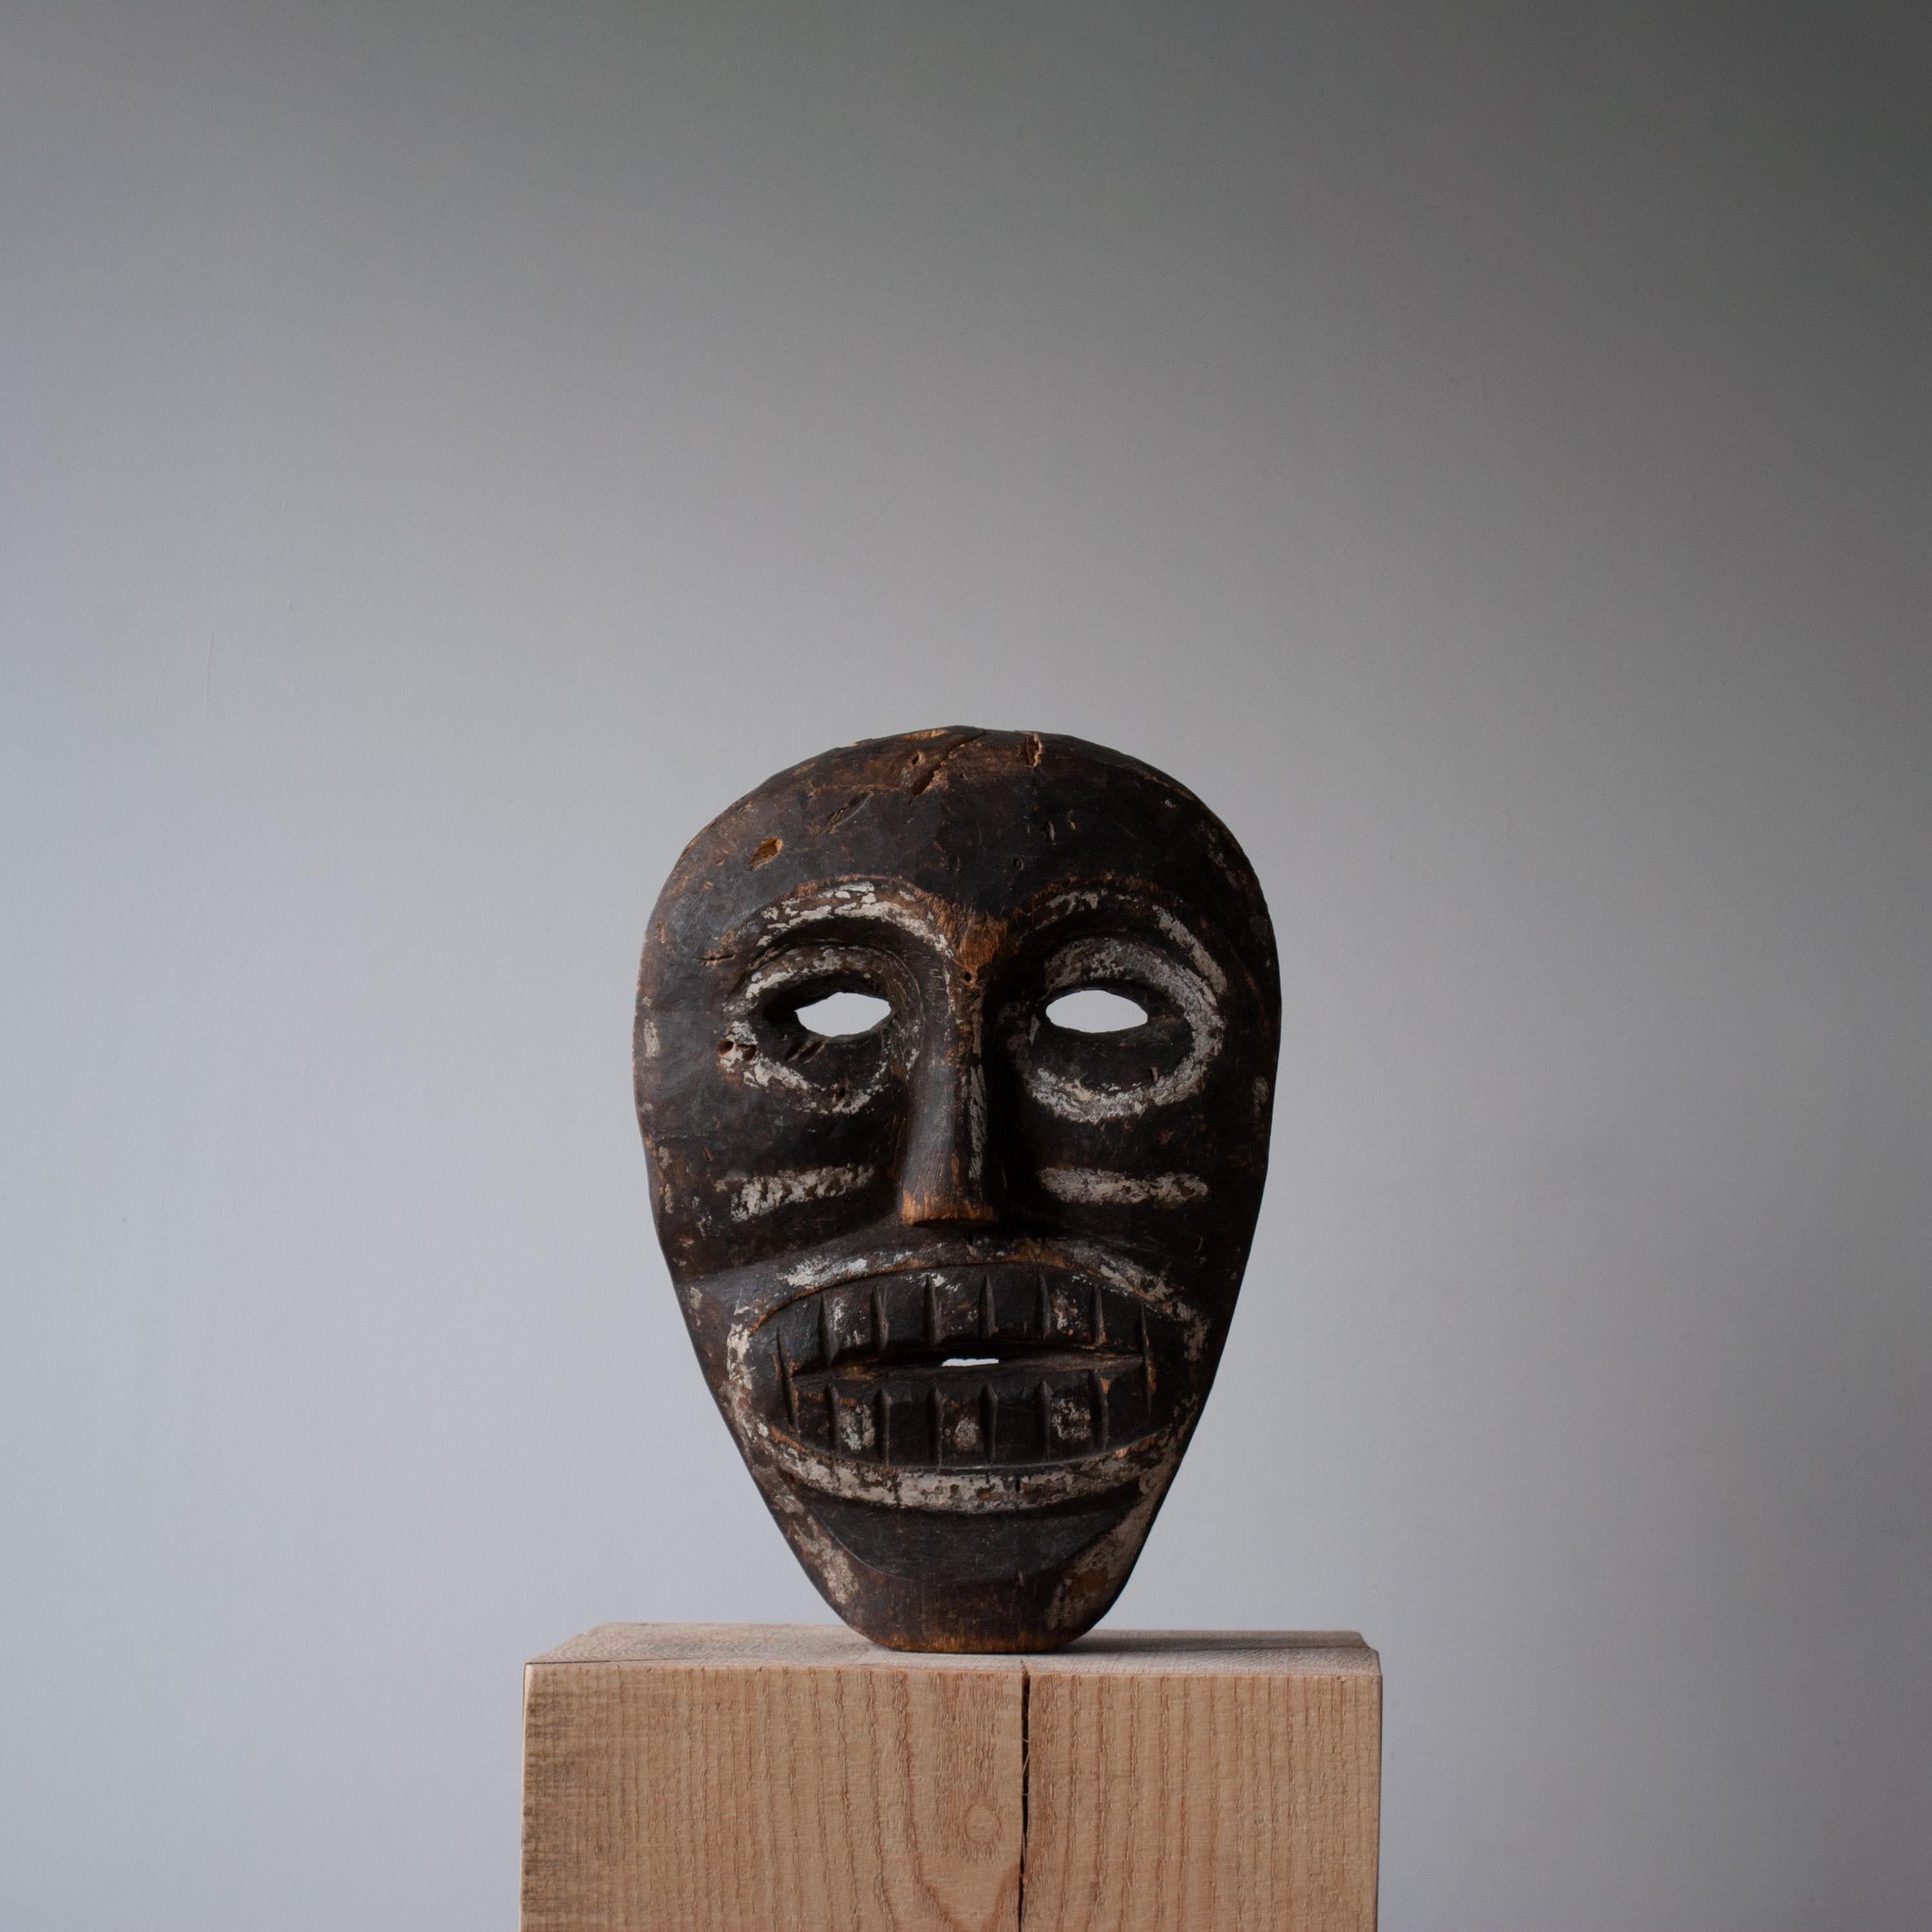 A rare Iban Dayak shaman ritual mask, early to mid 20th century, Kalimantan/Borneo, Indonesia. Hand carved from local jelutong wood with existing decorative lime and charcoal/pigments.